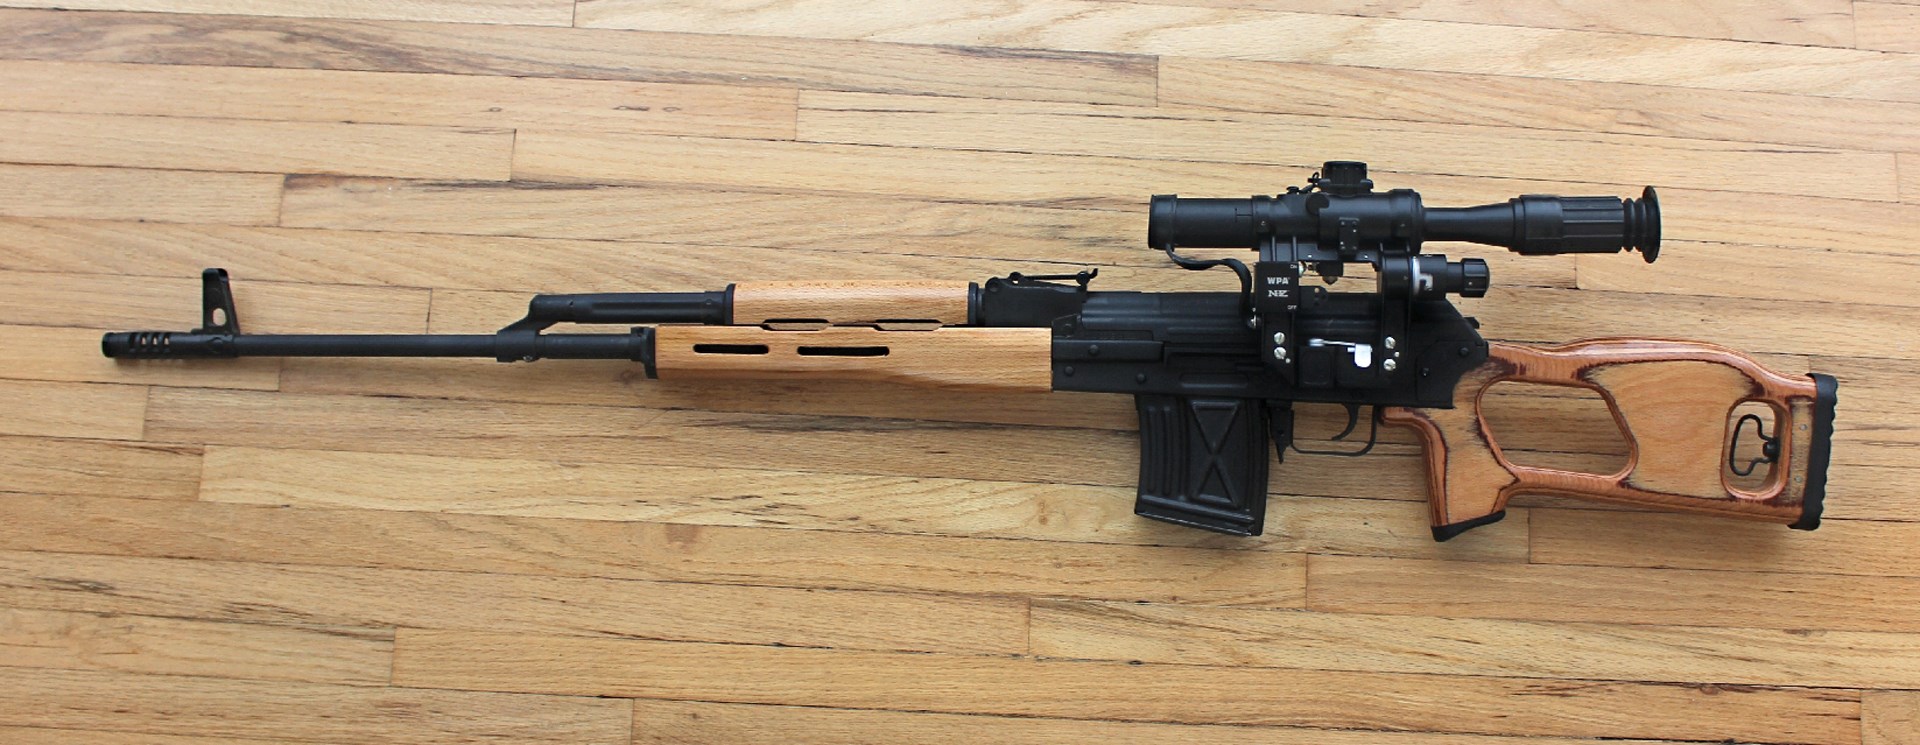 Century Arms PSL 54 sniper rifle left-side view.